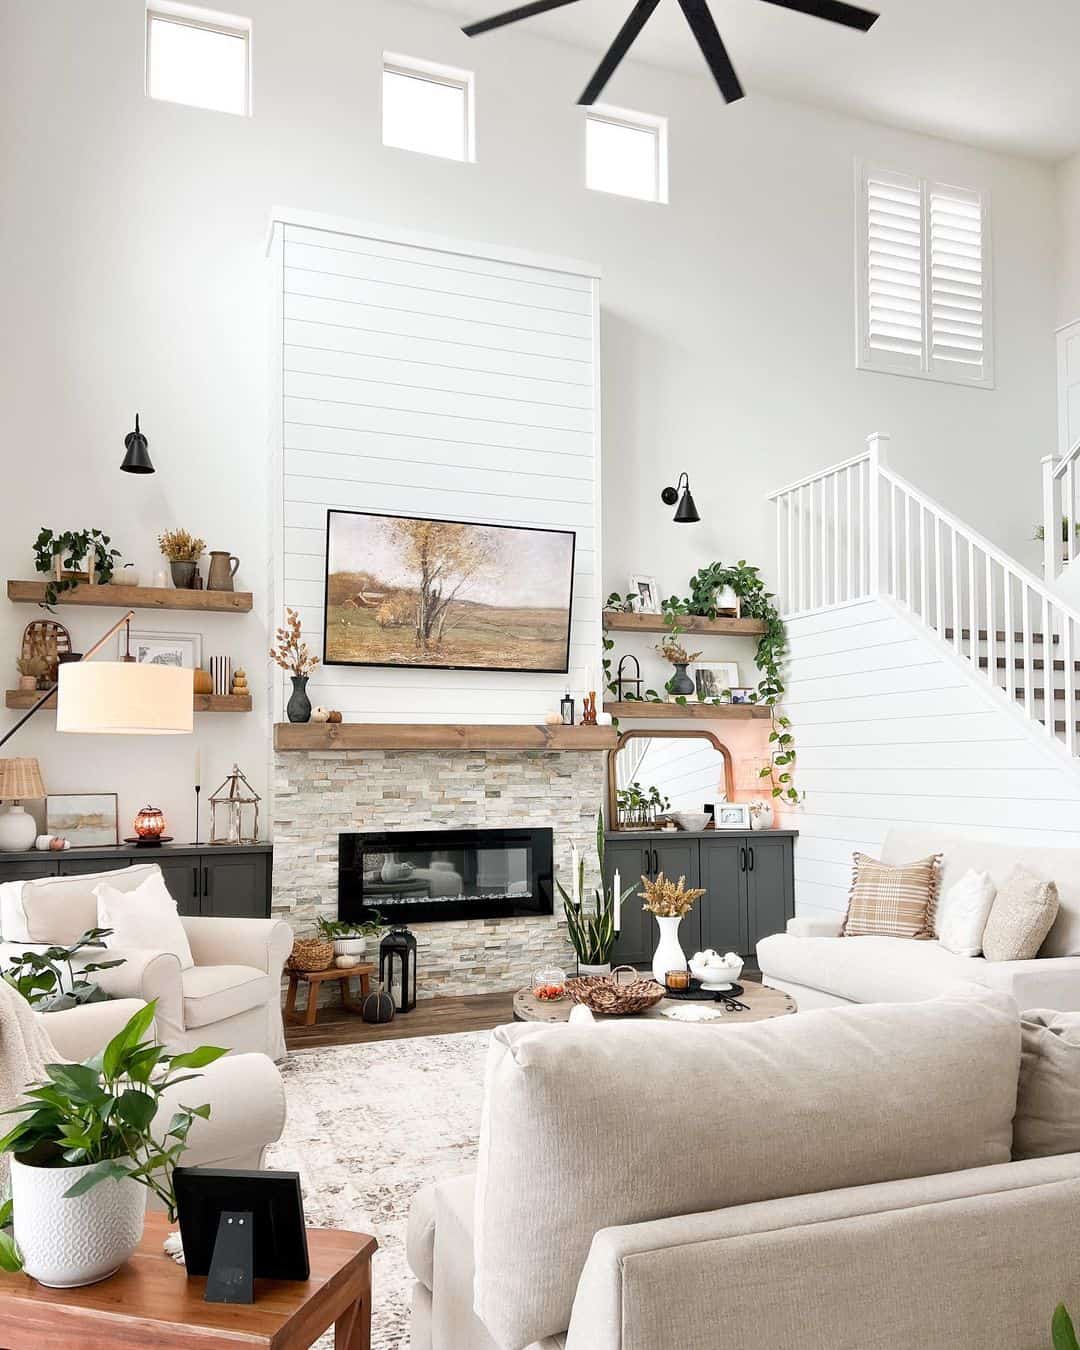  Modern Country Chic in the Family Room